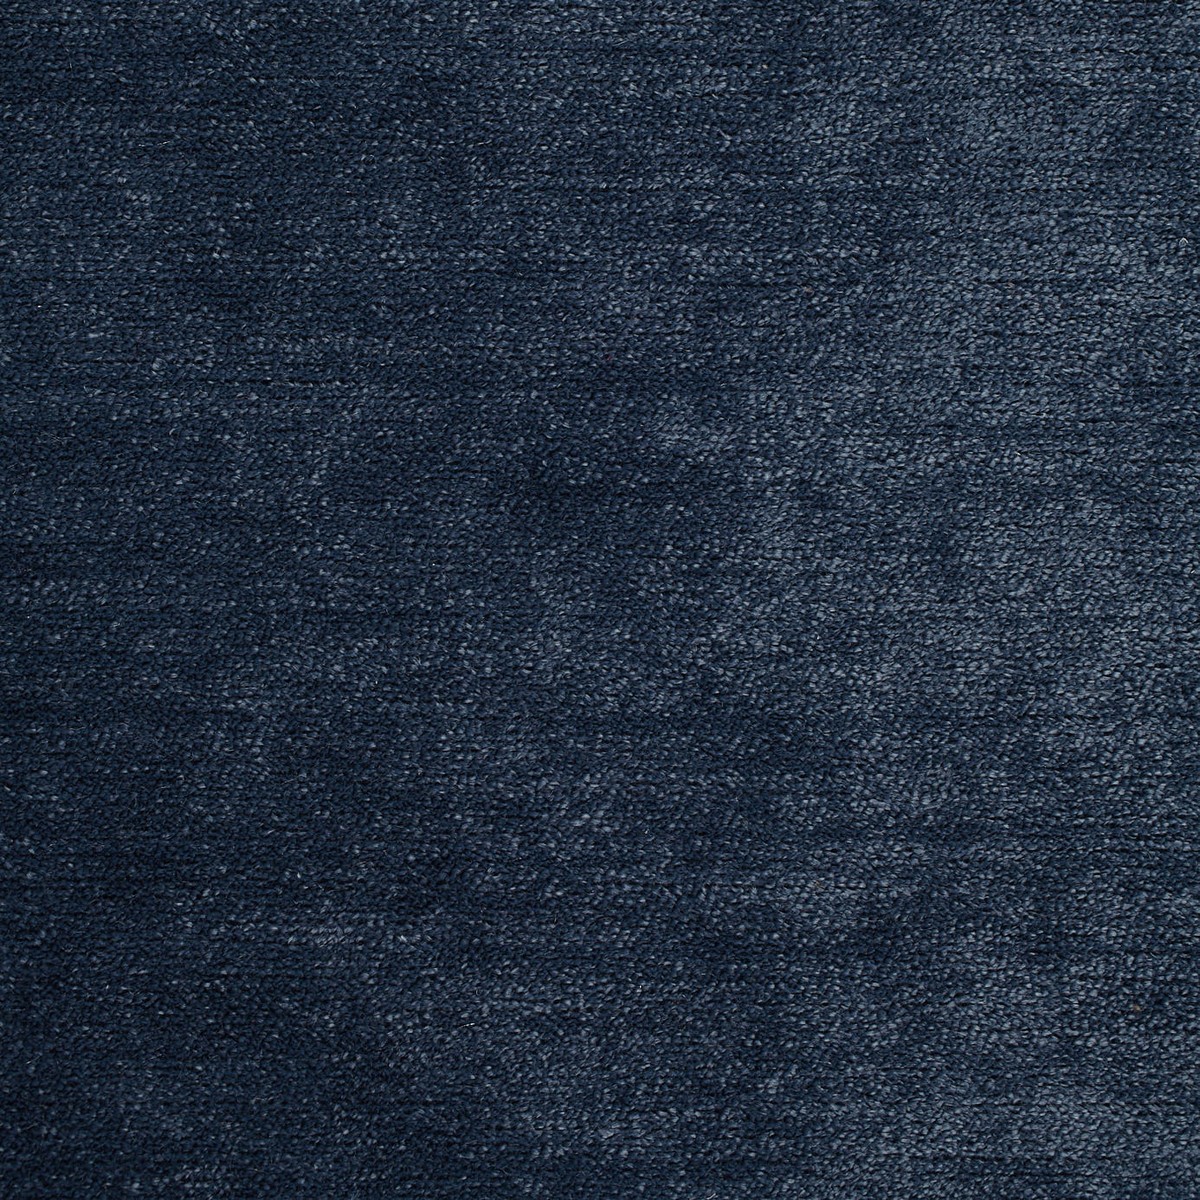 Lusso Denim Fabric by Harlequin